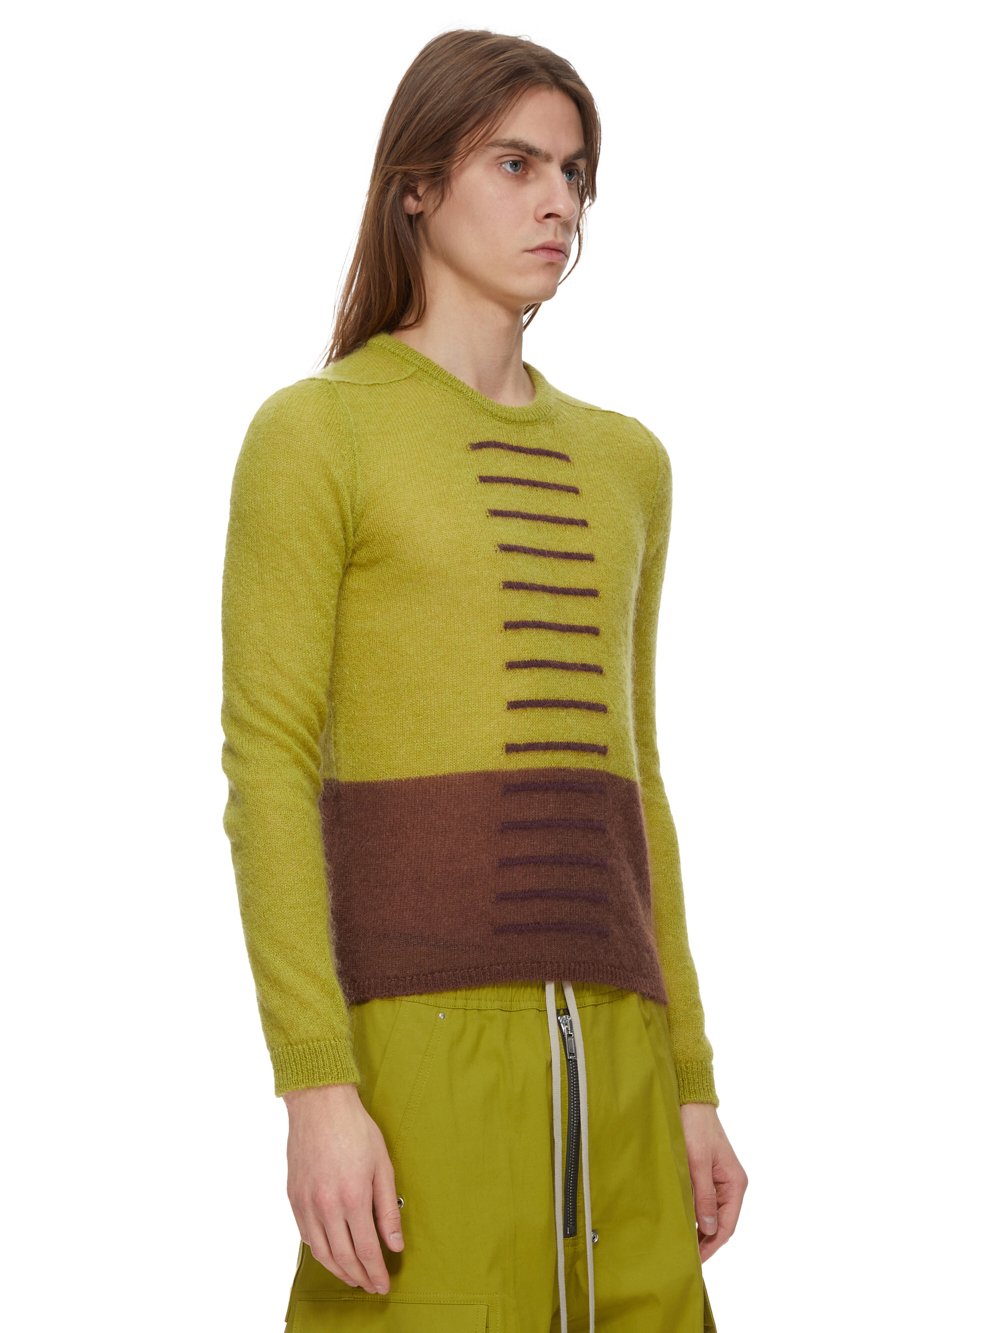 RICK OWENS FW23 LUXOR JUDD IN ACID, BROWN AND AMETHYST JUDD KNIT